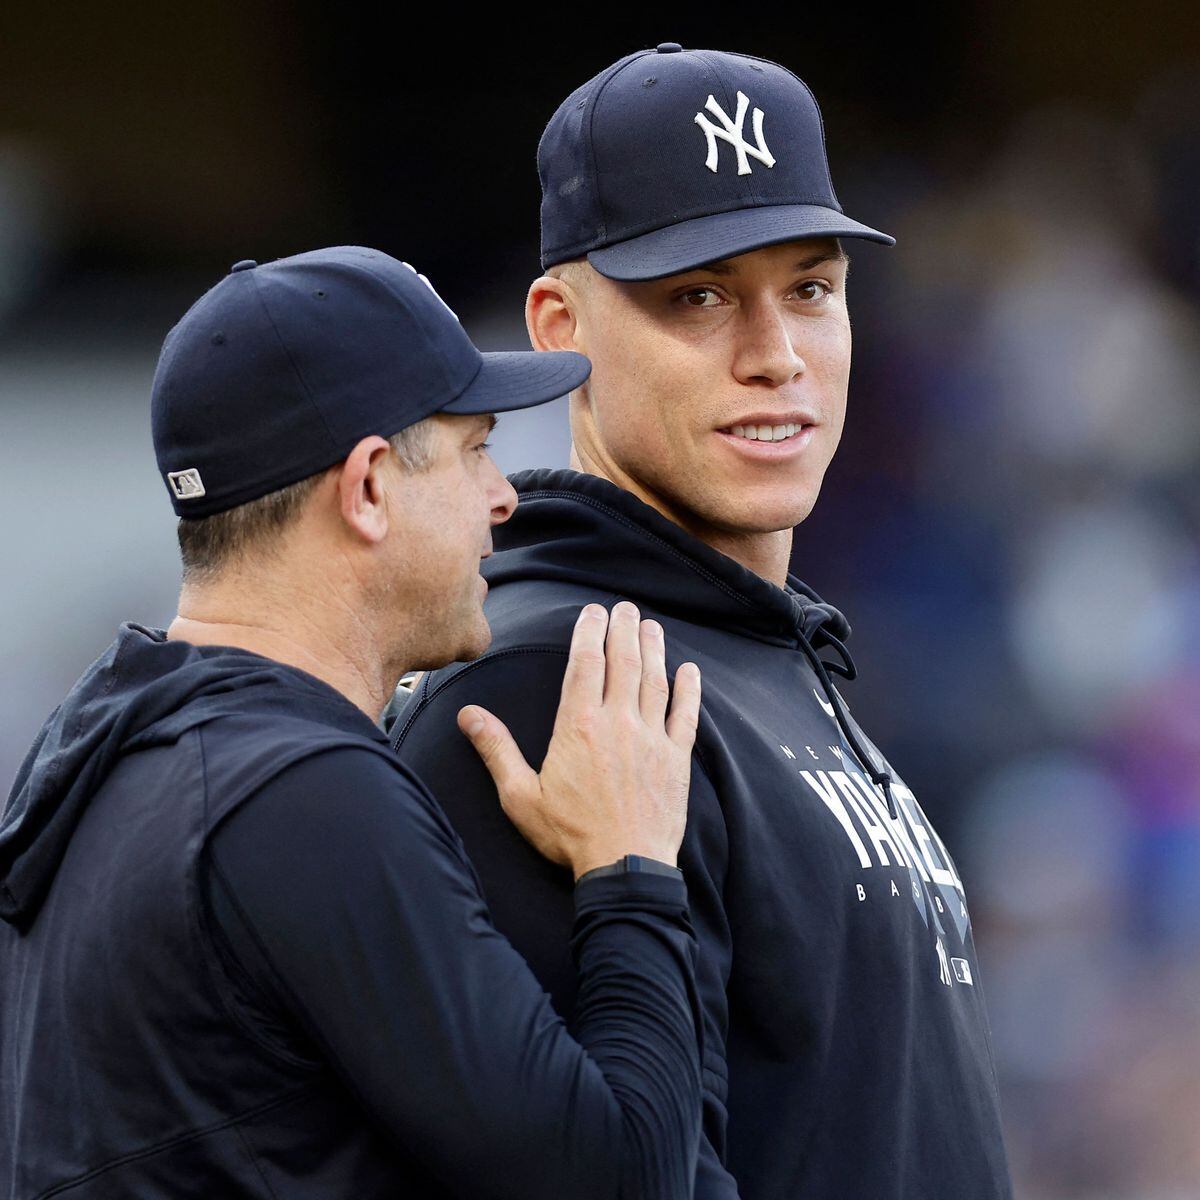 Does Aaron Judge's Size Make Him Injury Prone? - The New York Times